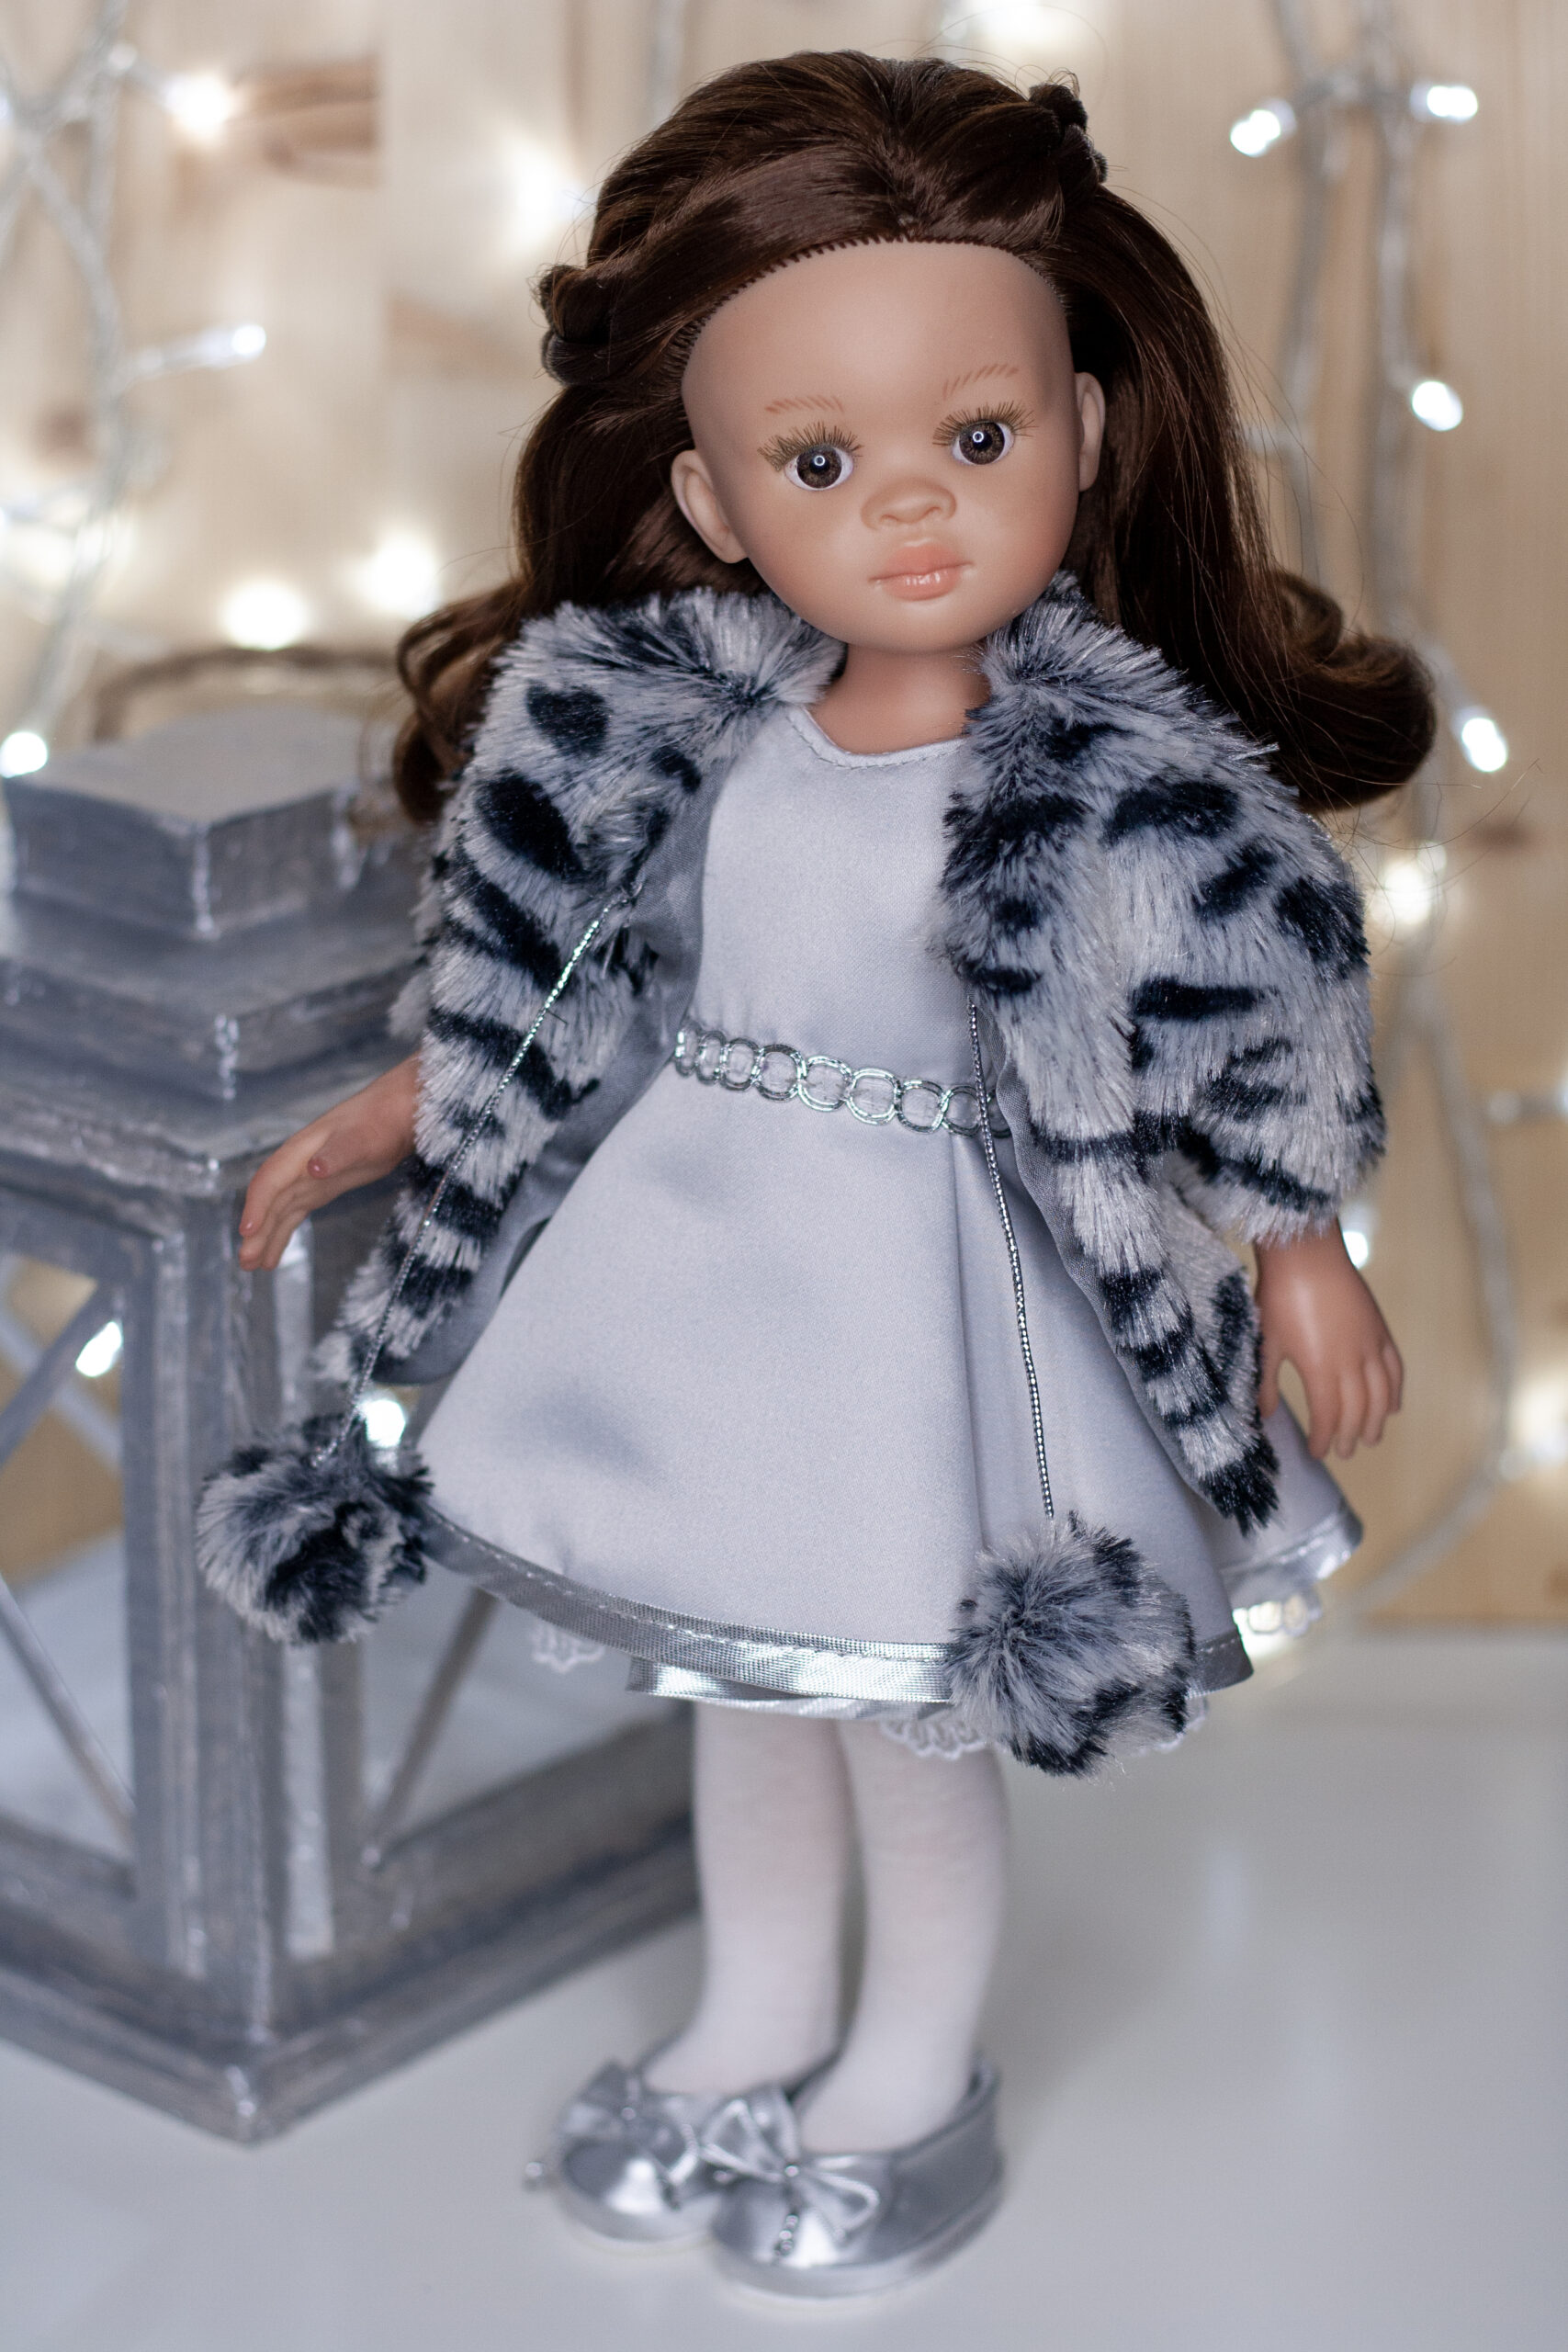 Clothes for dolls Paola Reina Dress for Little Darling 13 inch